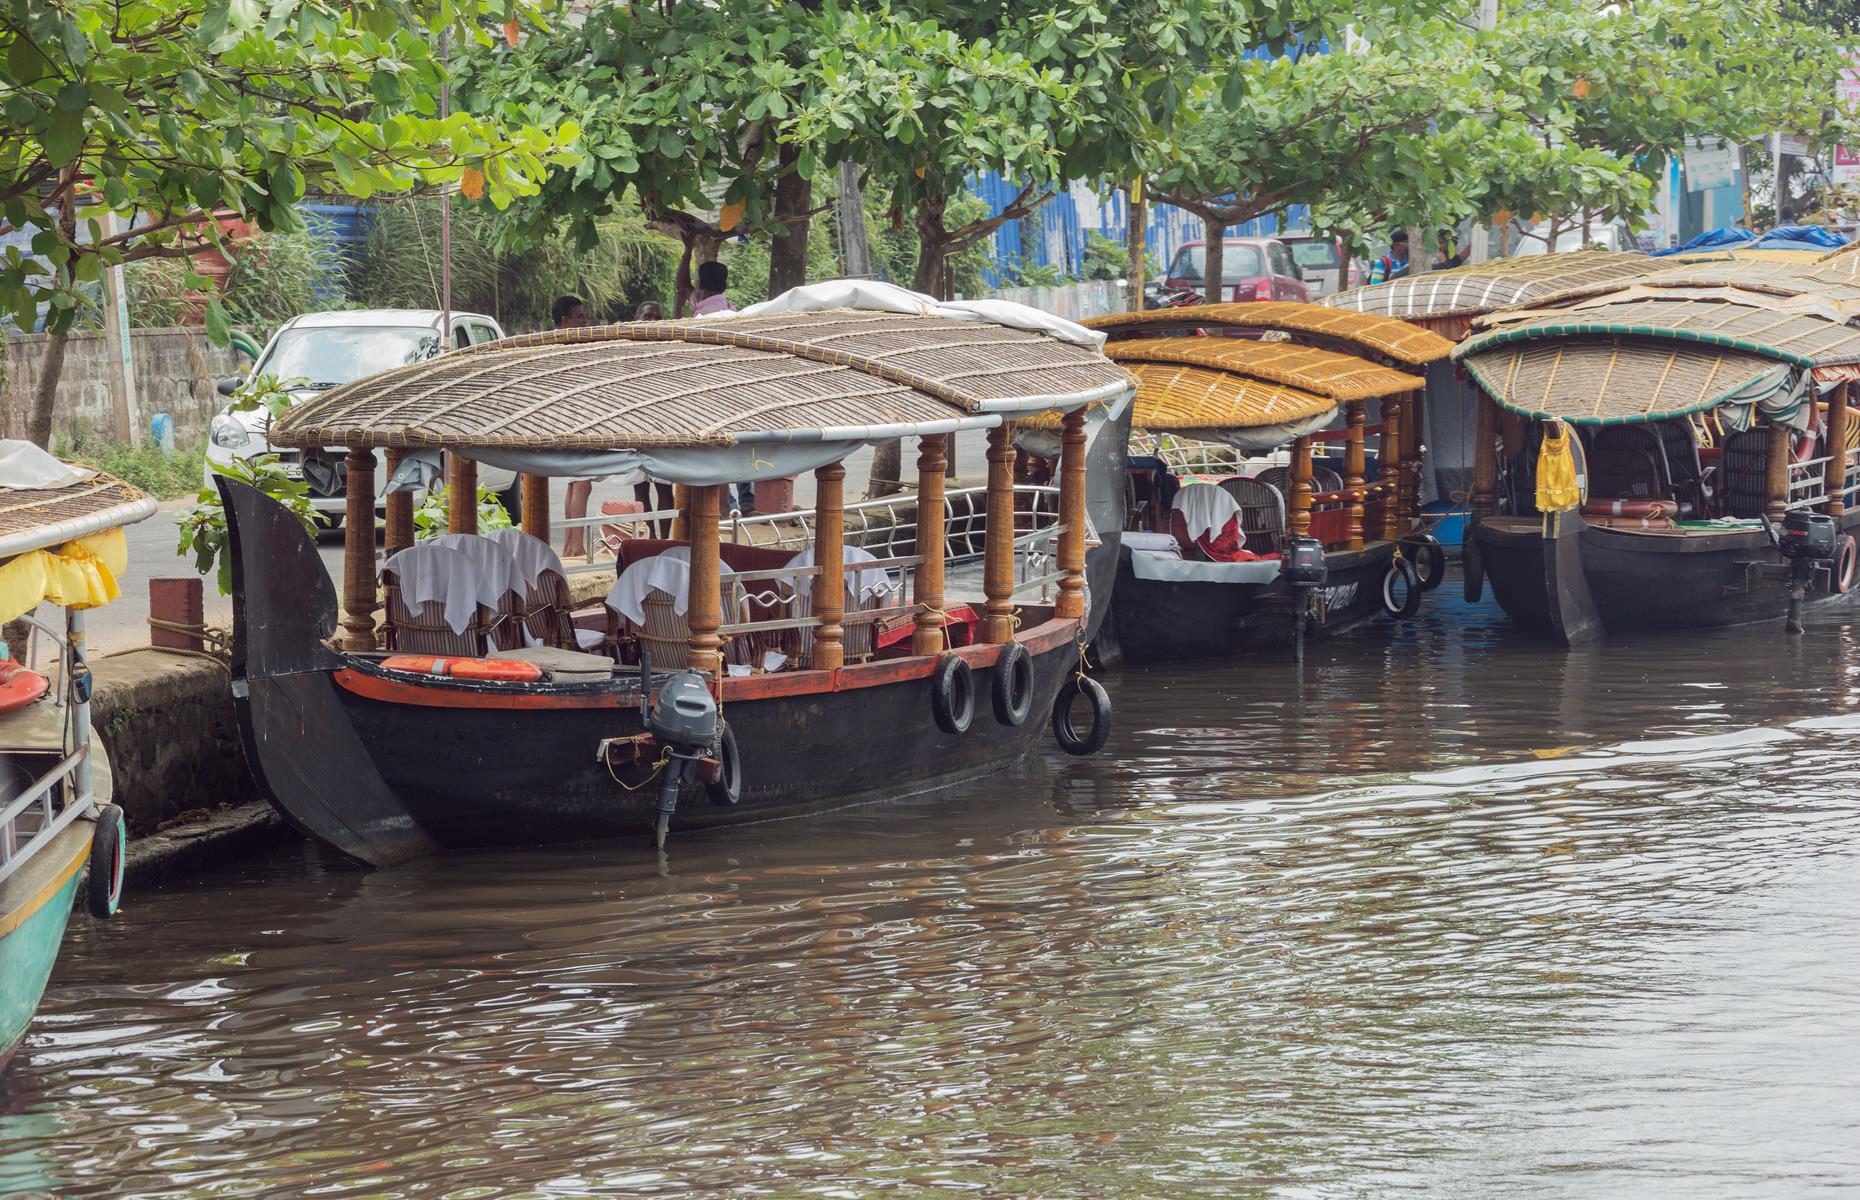 <p>Visit the main hub of Alleppey in the morning and you'll see hundreds of <em>kettuvallam</em> (thatch-roofed riceboats) chugging along to drop off and pick up passengers. The increasingly congested waters have become heavily polluted by spilled fuel and sadly the sight of boat workers throwing litter into the water is not an uncommon one. </p>  <p><a href="https://www.loveexploring.com/galleries/159756/destinations-which-dont-want-tourists-forbidden-city-rome-italy?page=1"><strong>These destinations don't want tourists to visit. Here's why</strong></a></p>